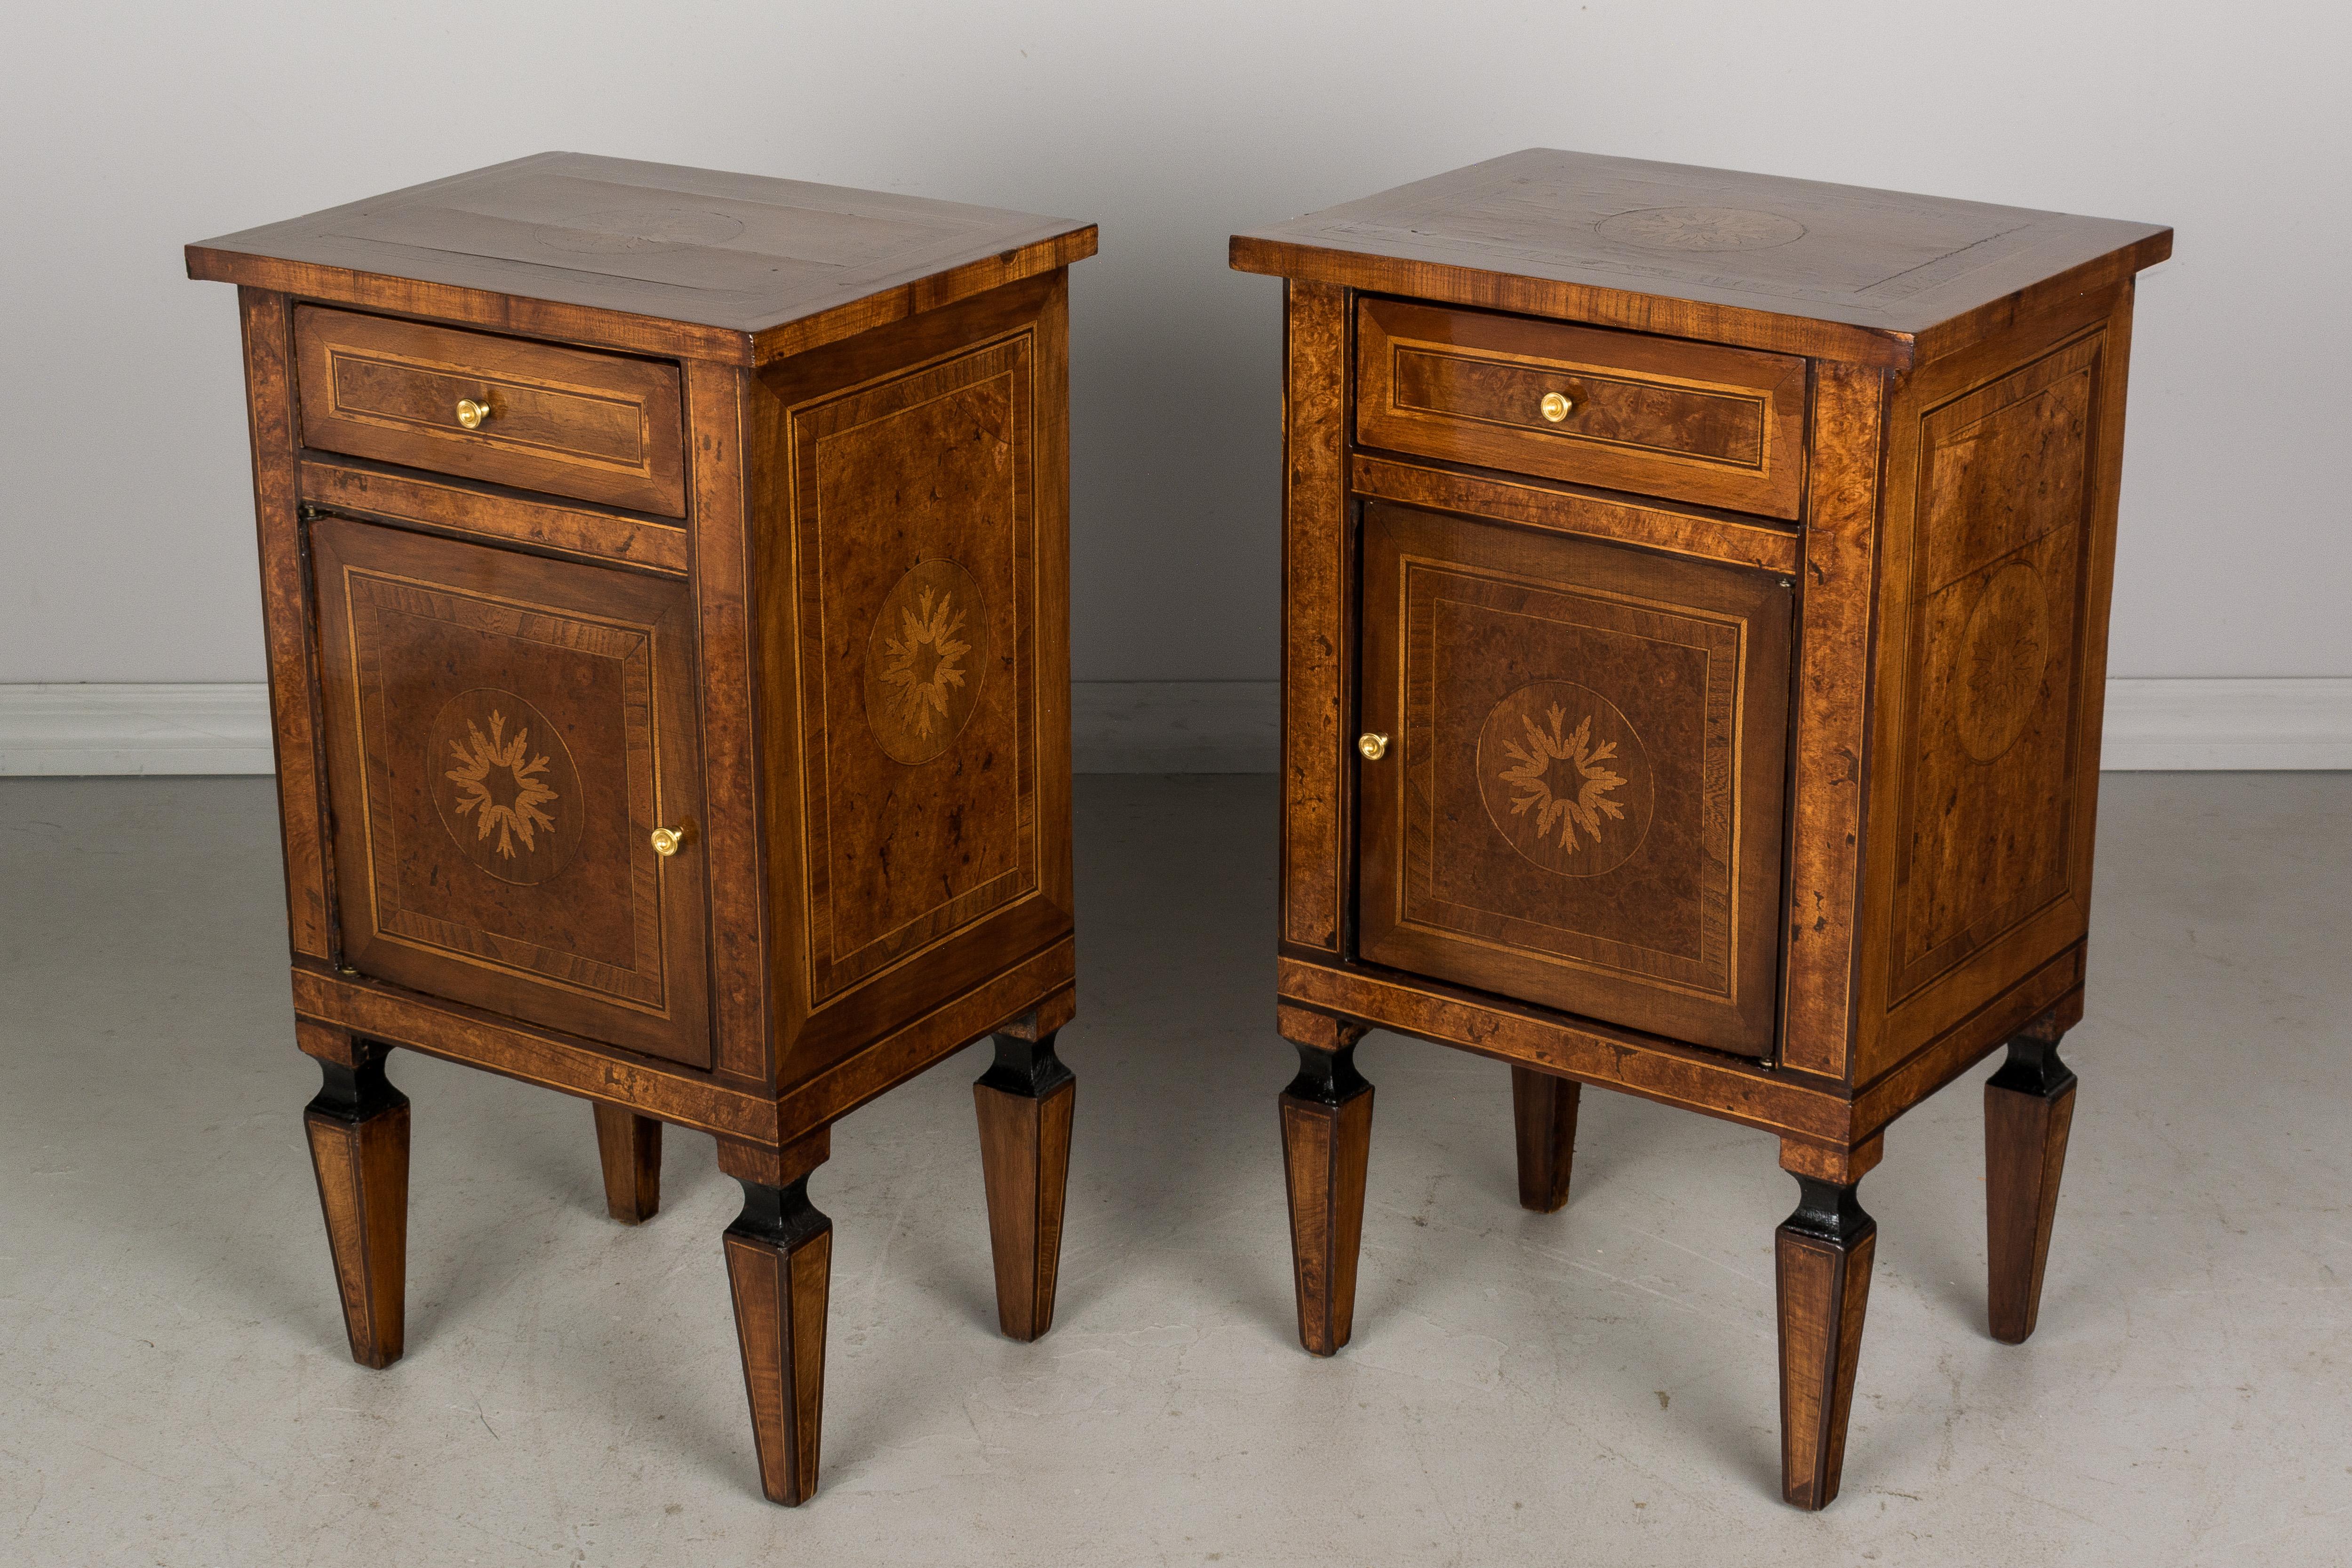 A near pair of Italian marquetry commoditos, or nightstands, with inlaid veneers of walnut and various woods and ebonized trim. French polish finish. The top, front and sides are decorated with central foliate medallions. Each with a single drawer